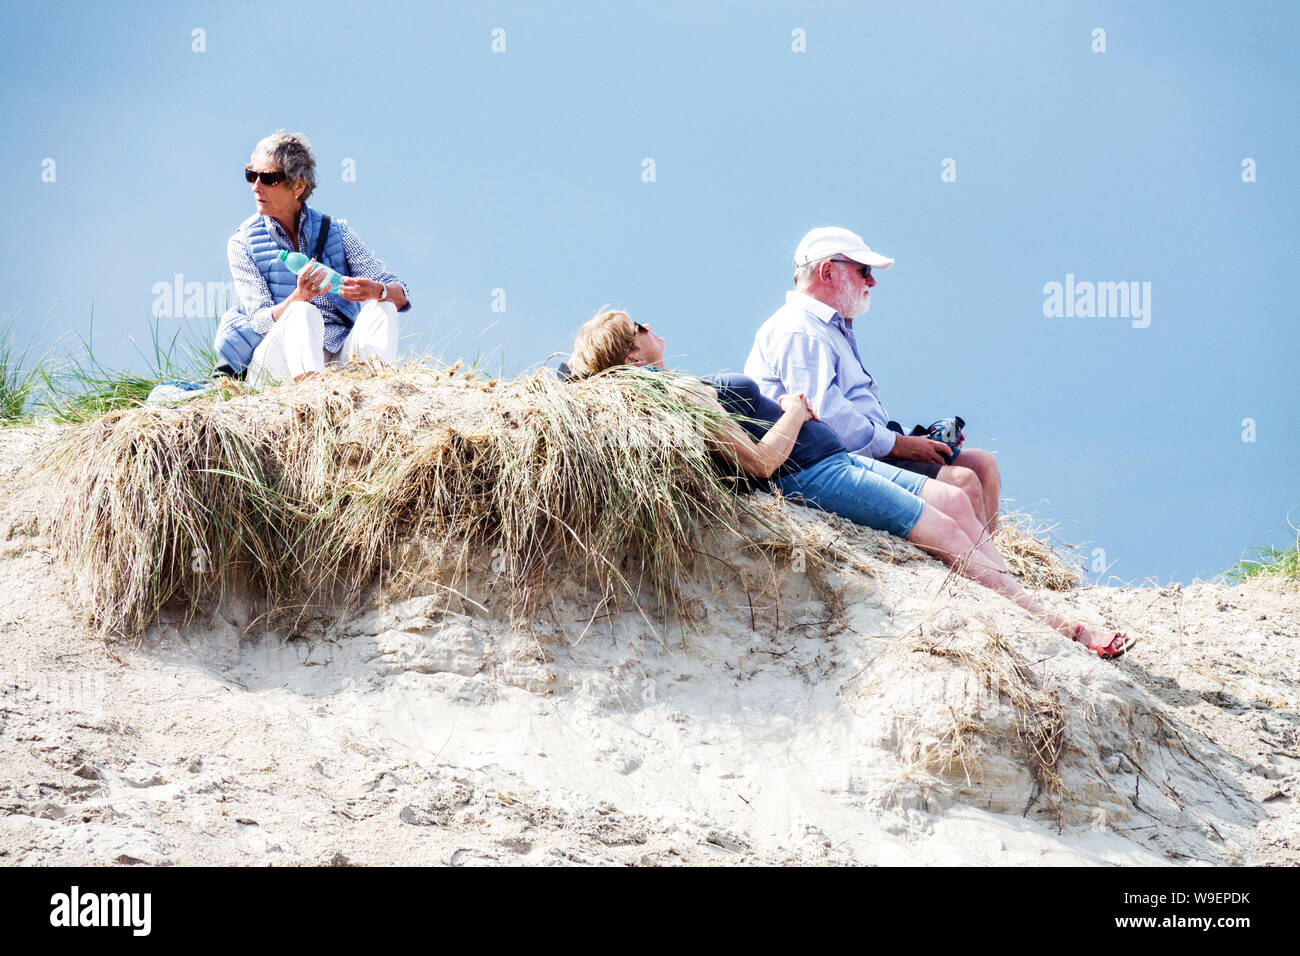 People relax in the dunes and watch the sea, the beach in Warnemunde Rostock Germany Stock Photo